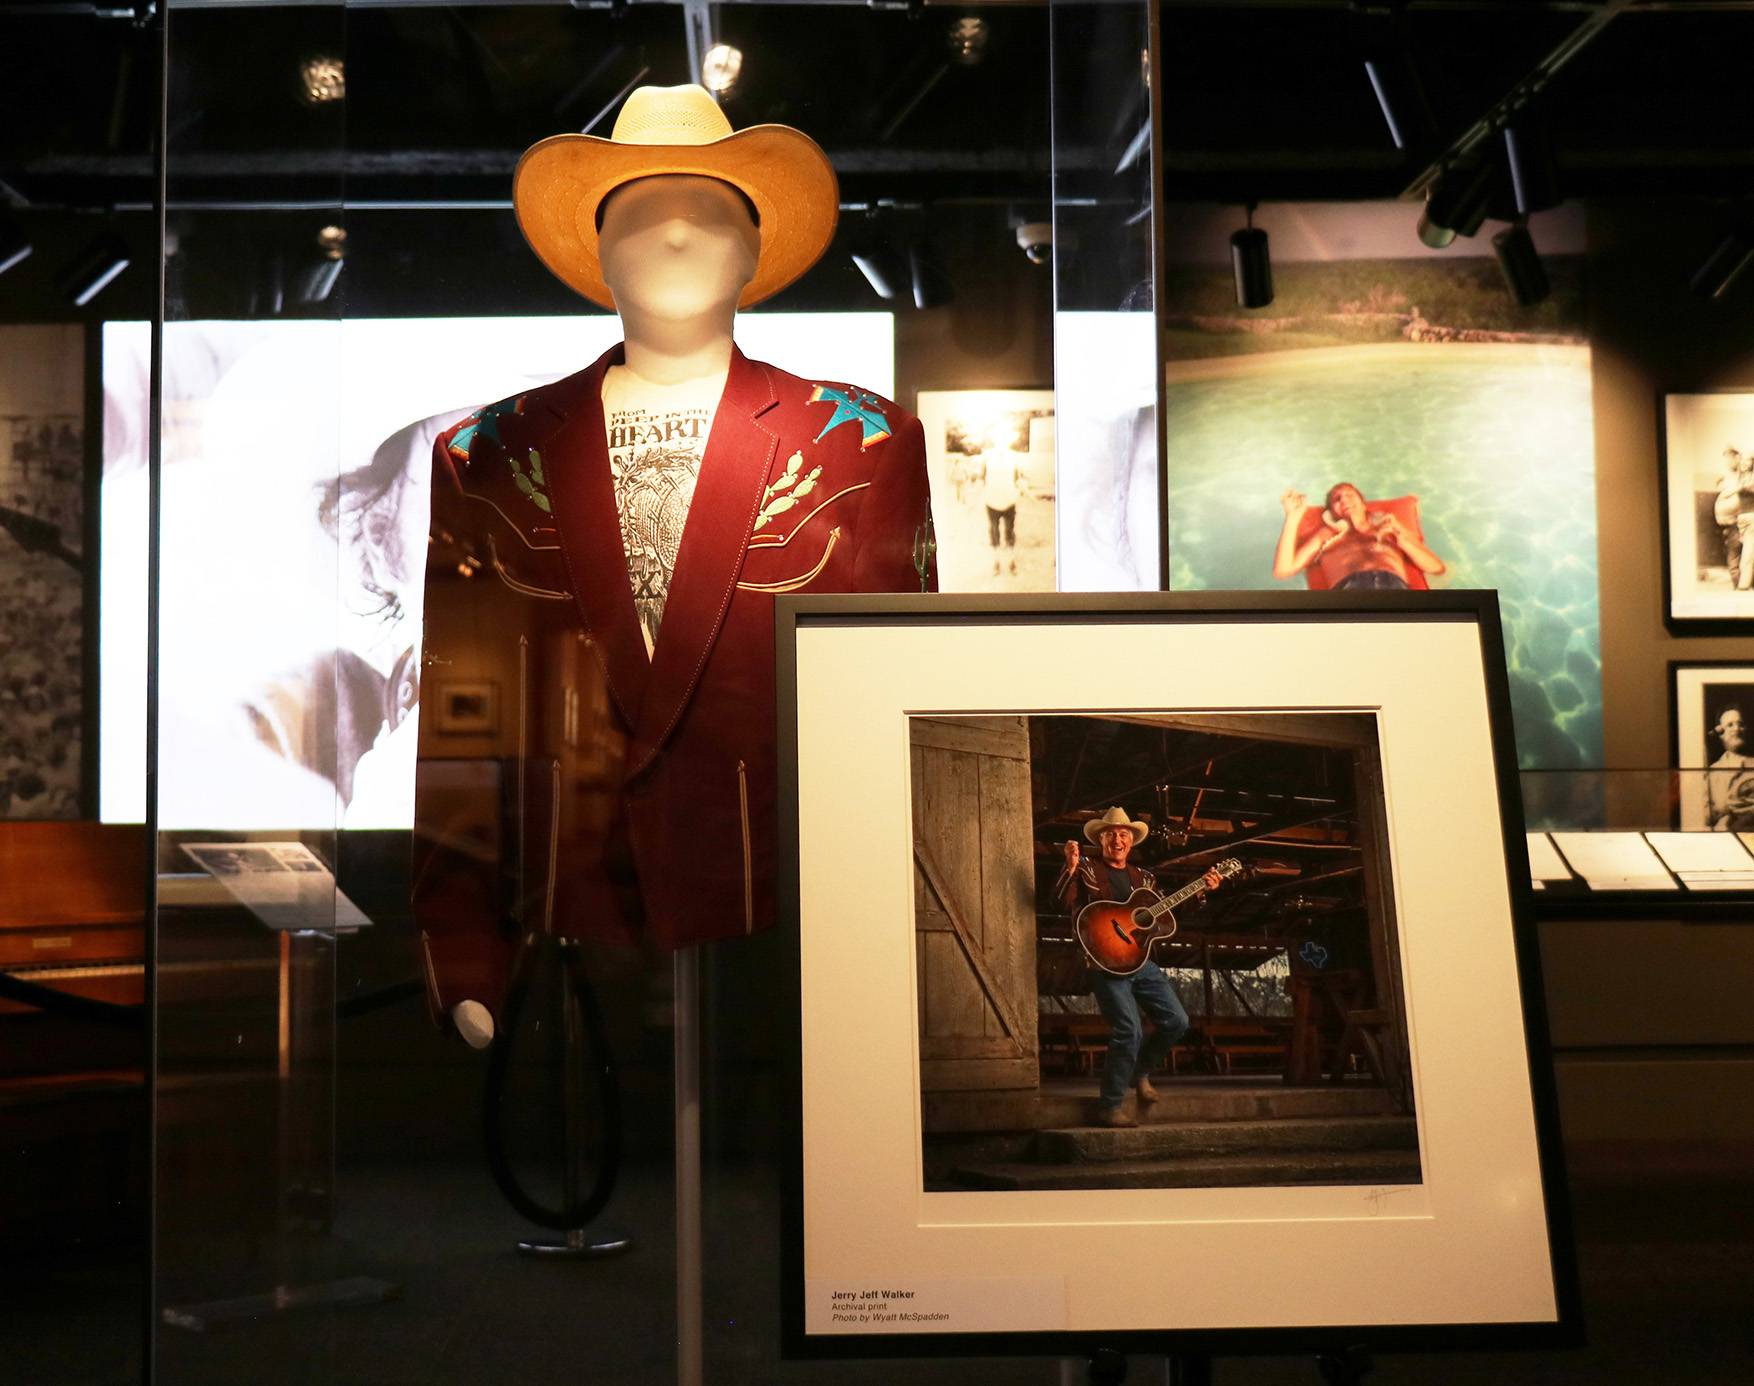 mannequin wearing a cowboy hat and jacket next to a framed picture of Jerry Jeff Walker